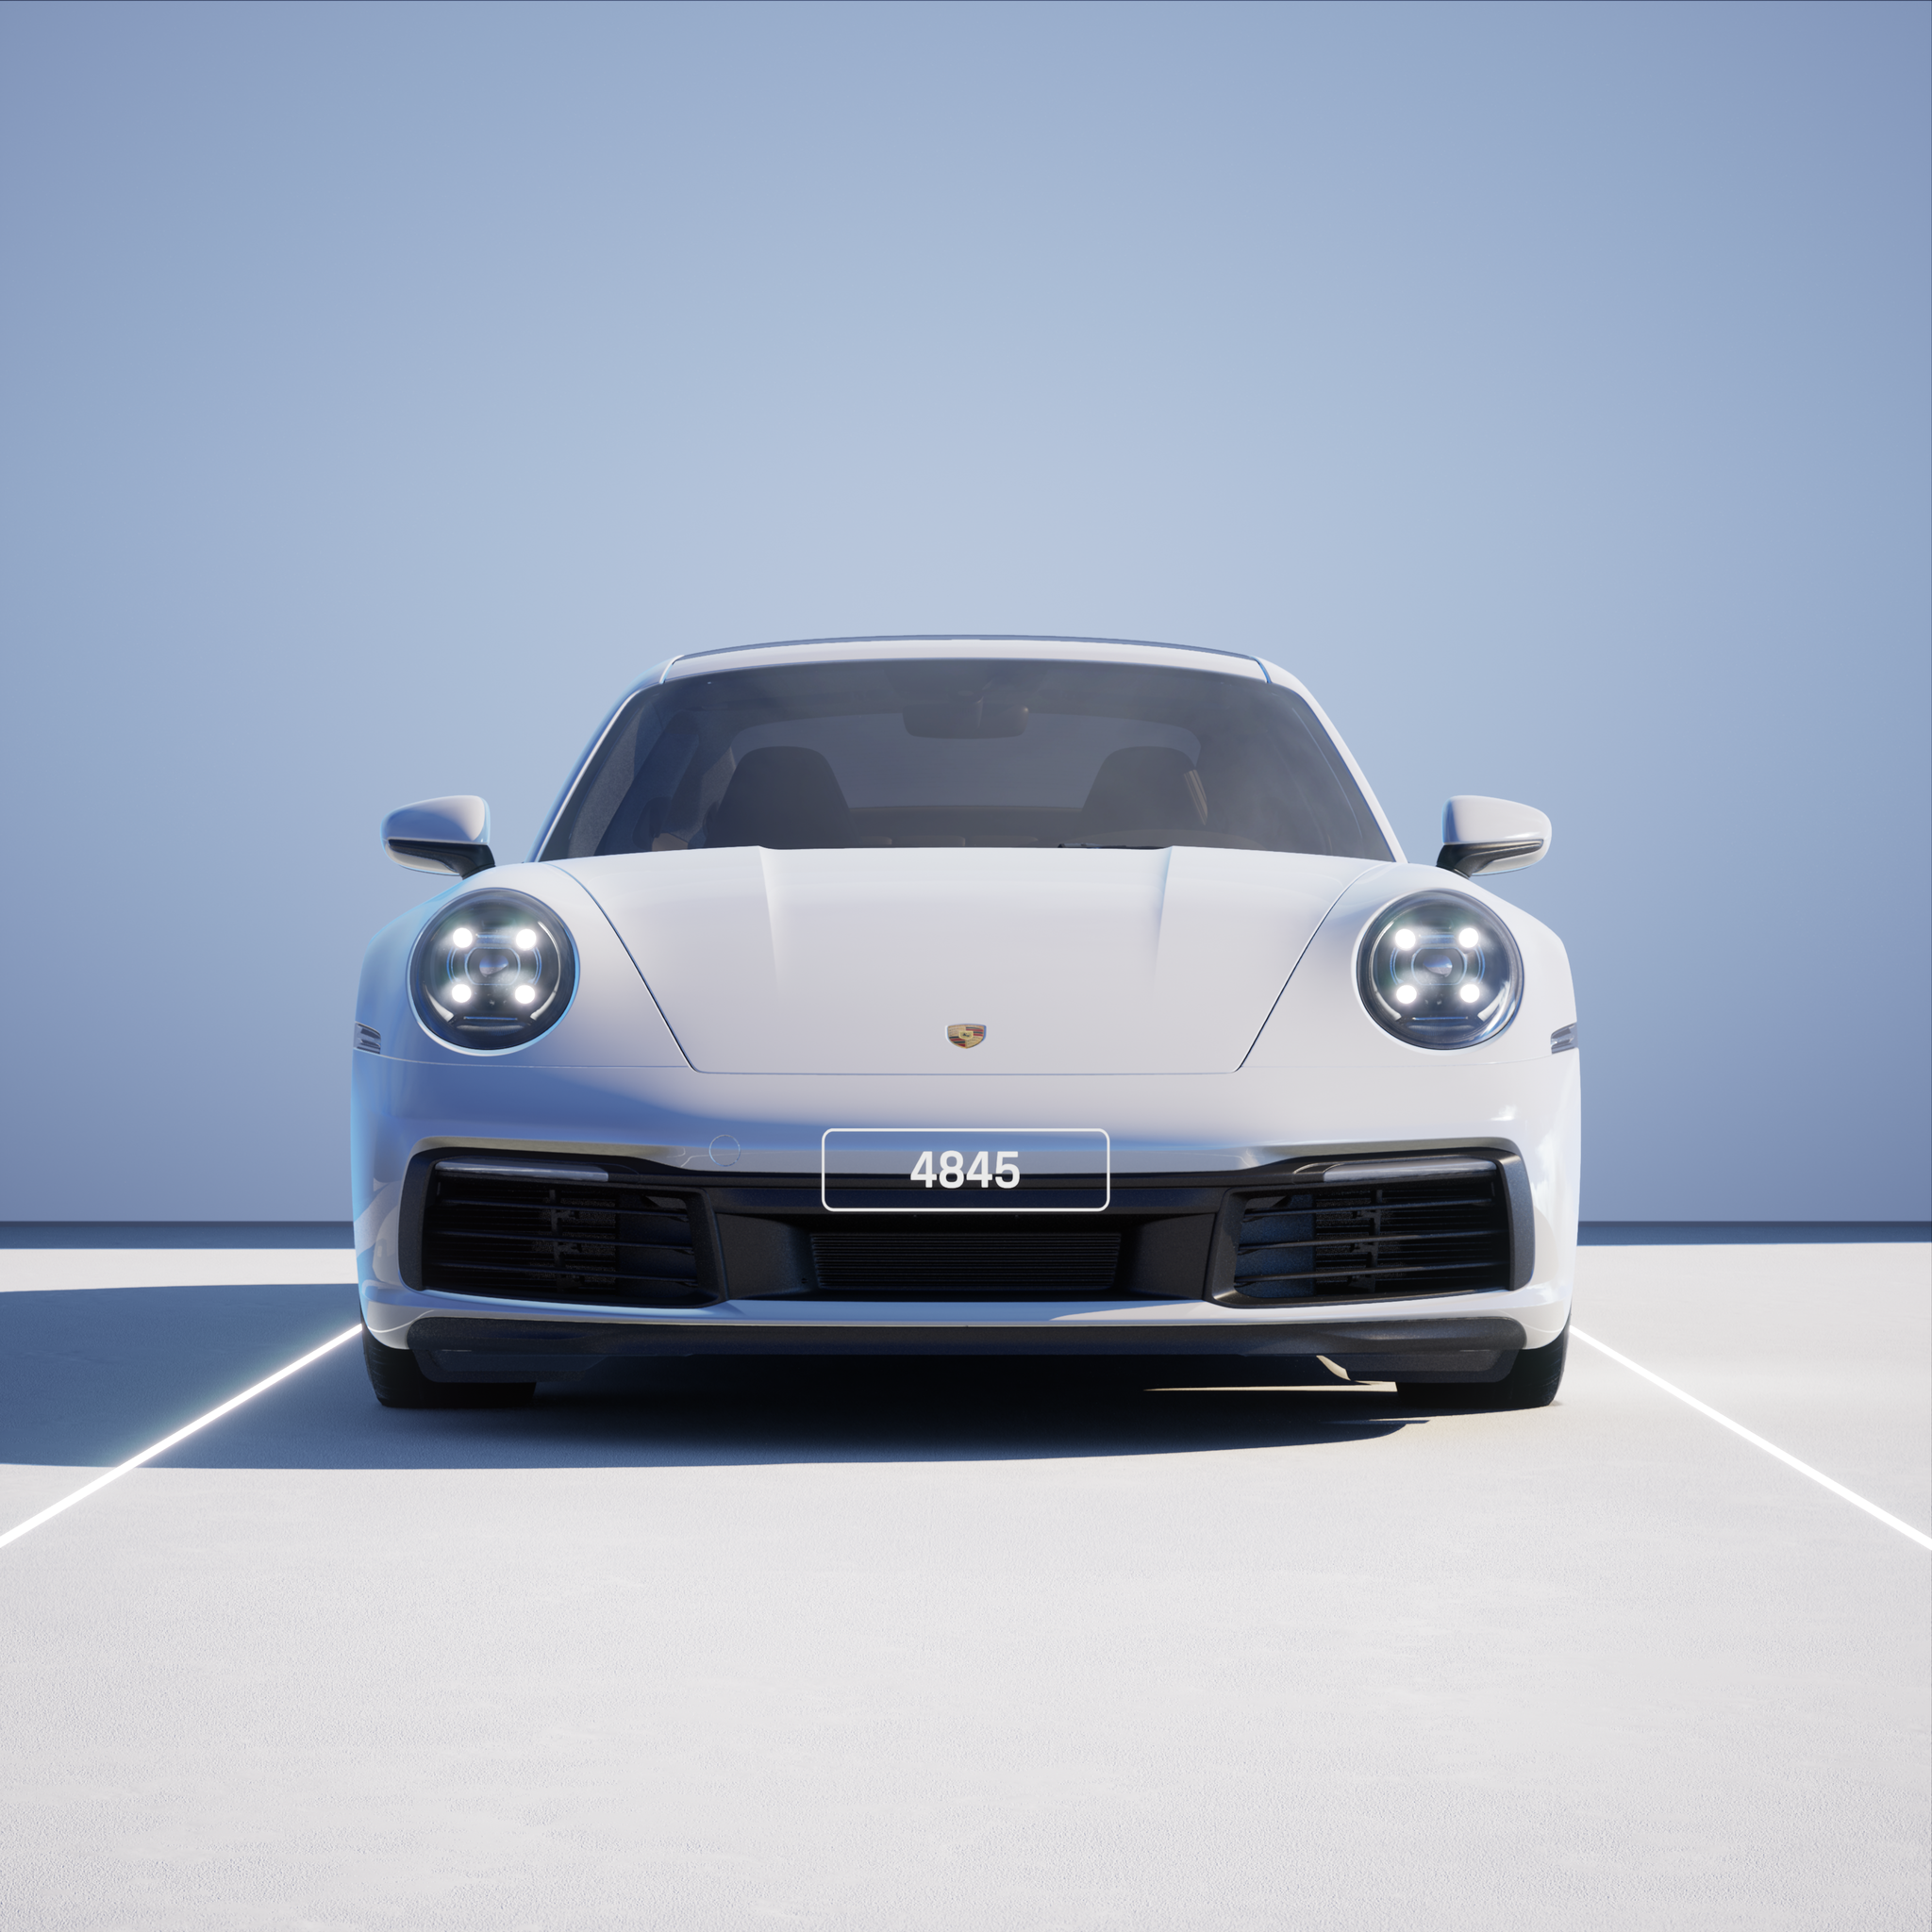 The PORSCHΞ 911 4845 image in phase